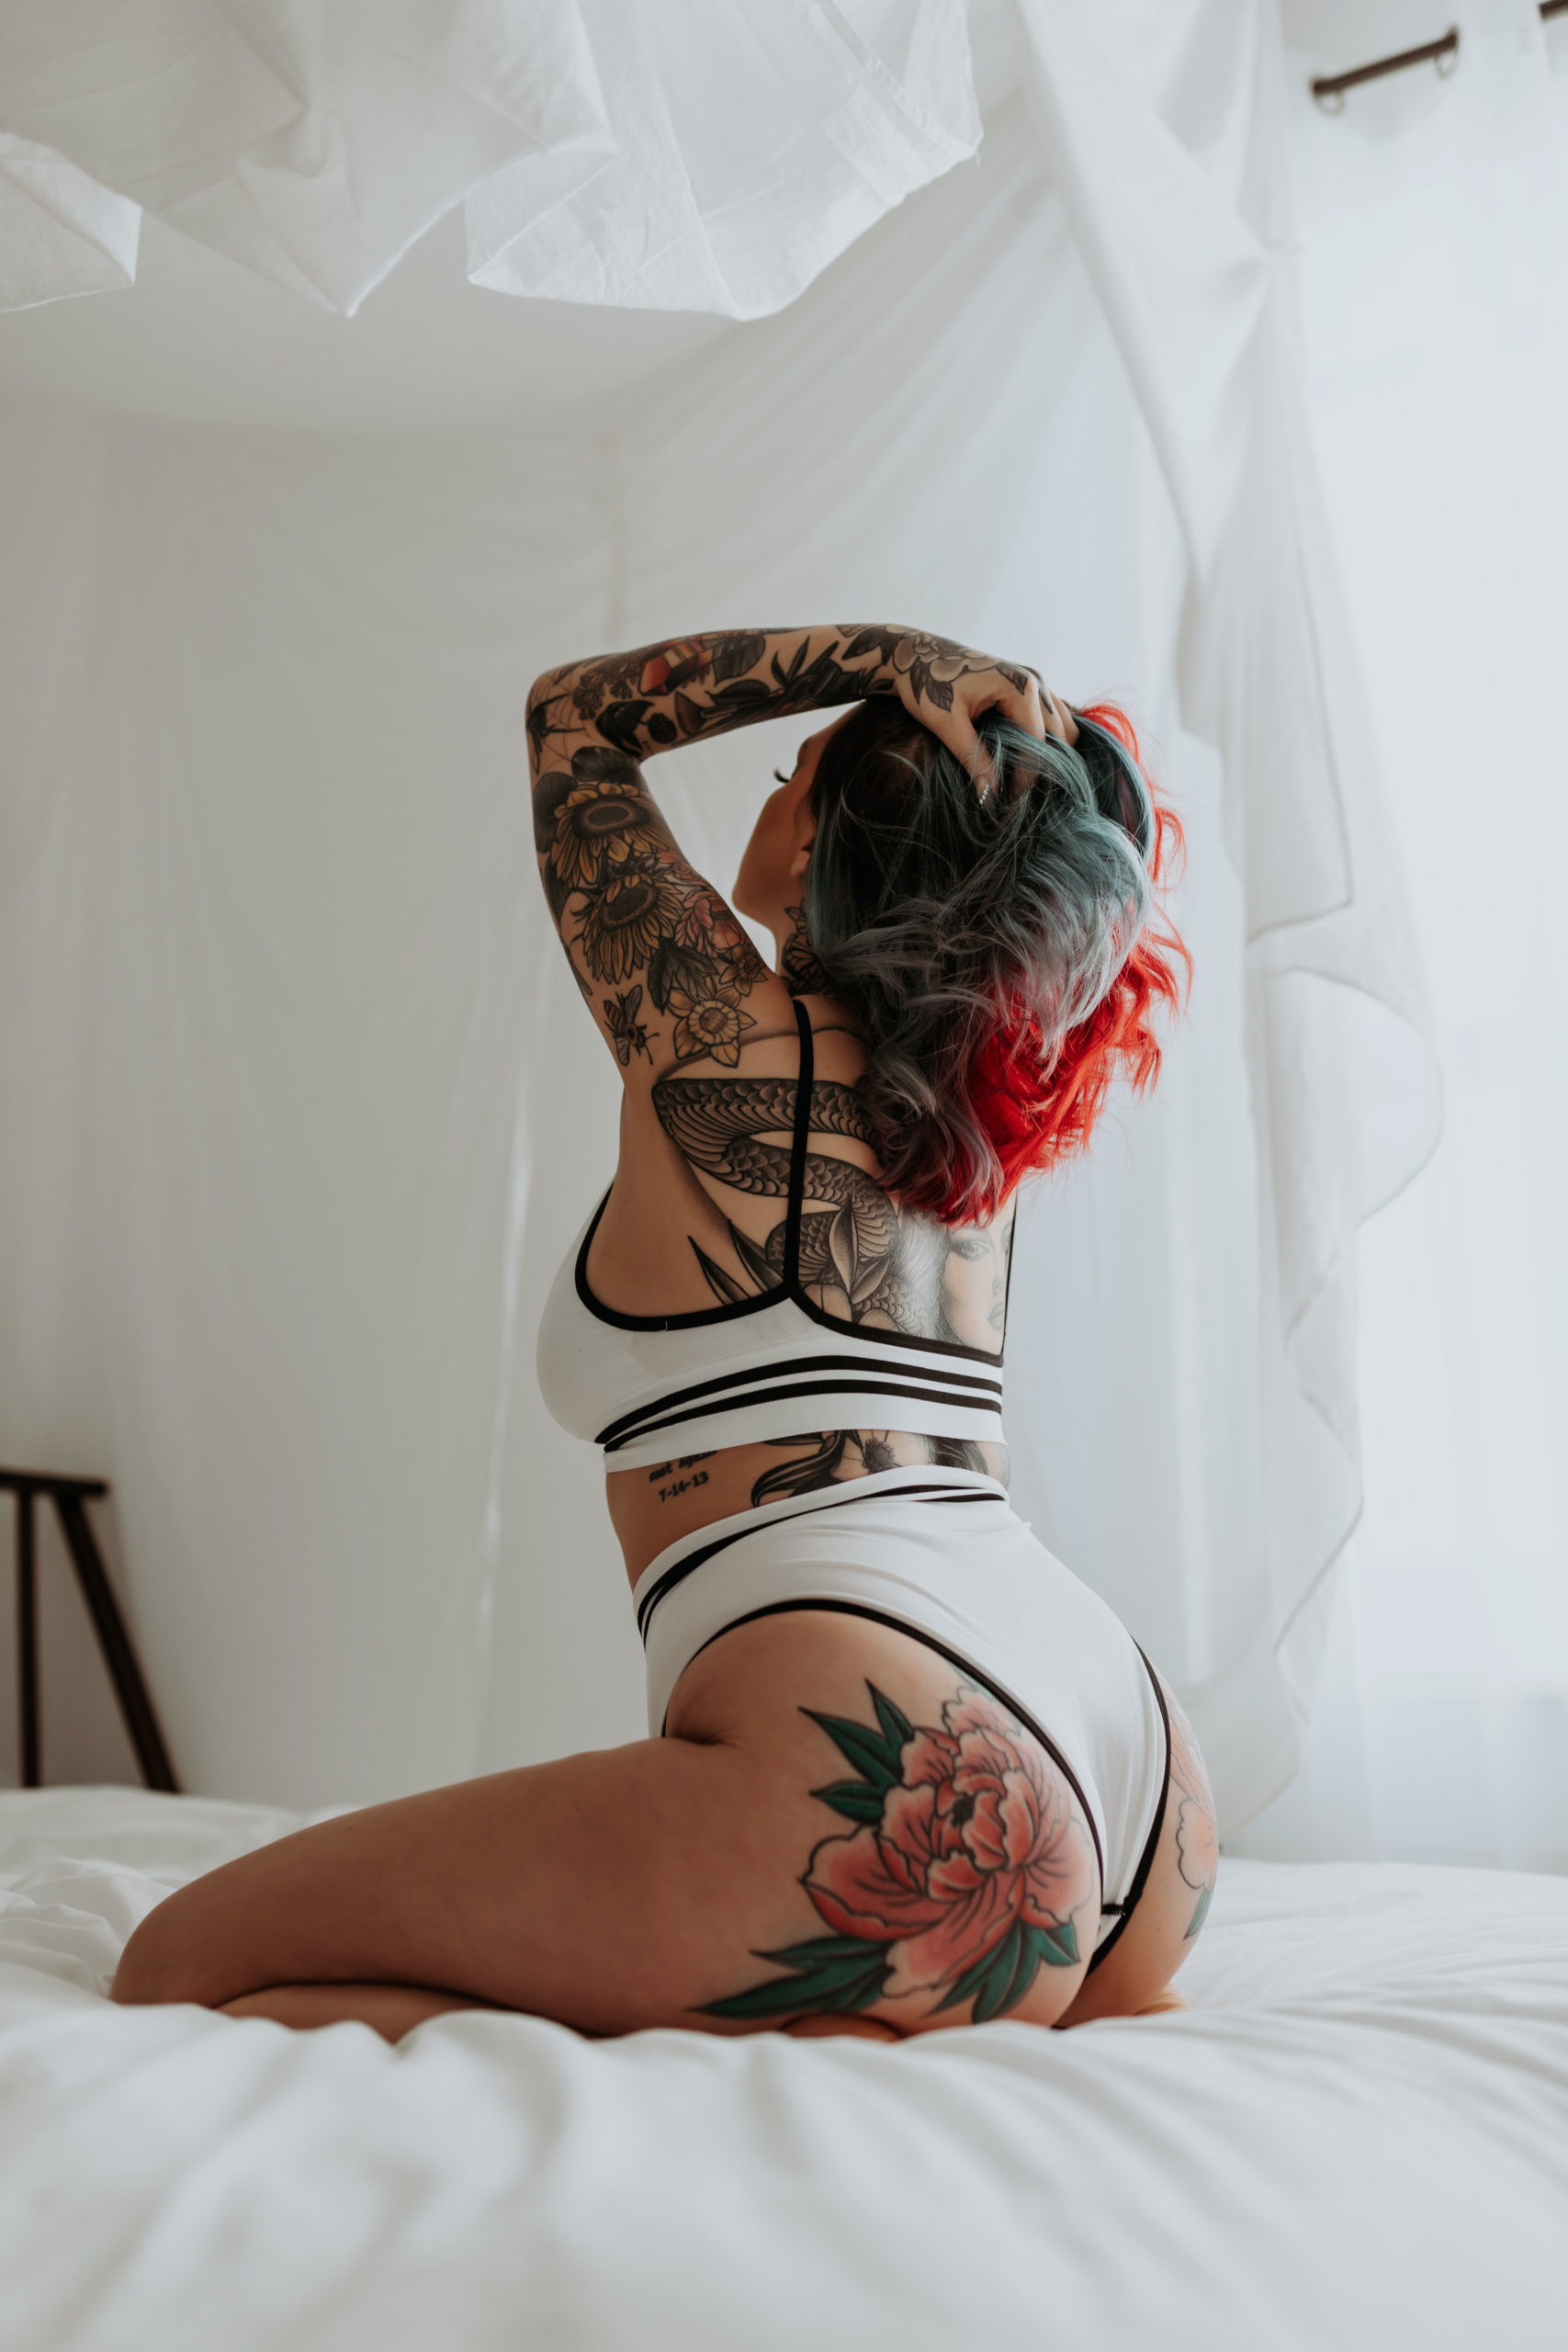 Lady grabs hair while kneeling on bed for Mary Castillo Photography